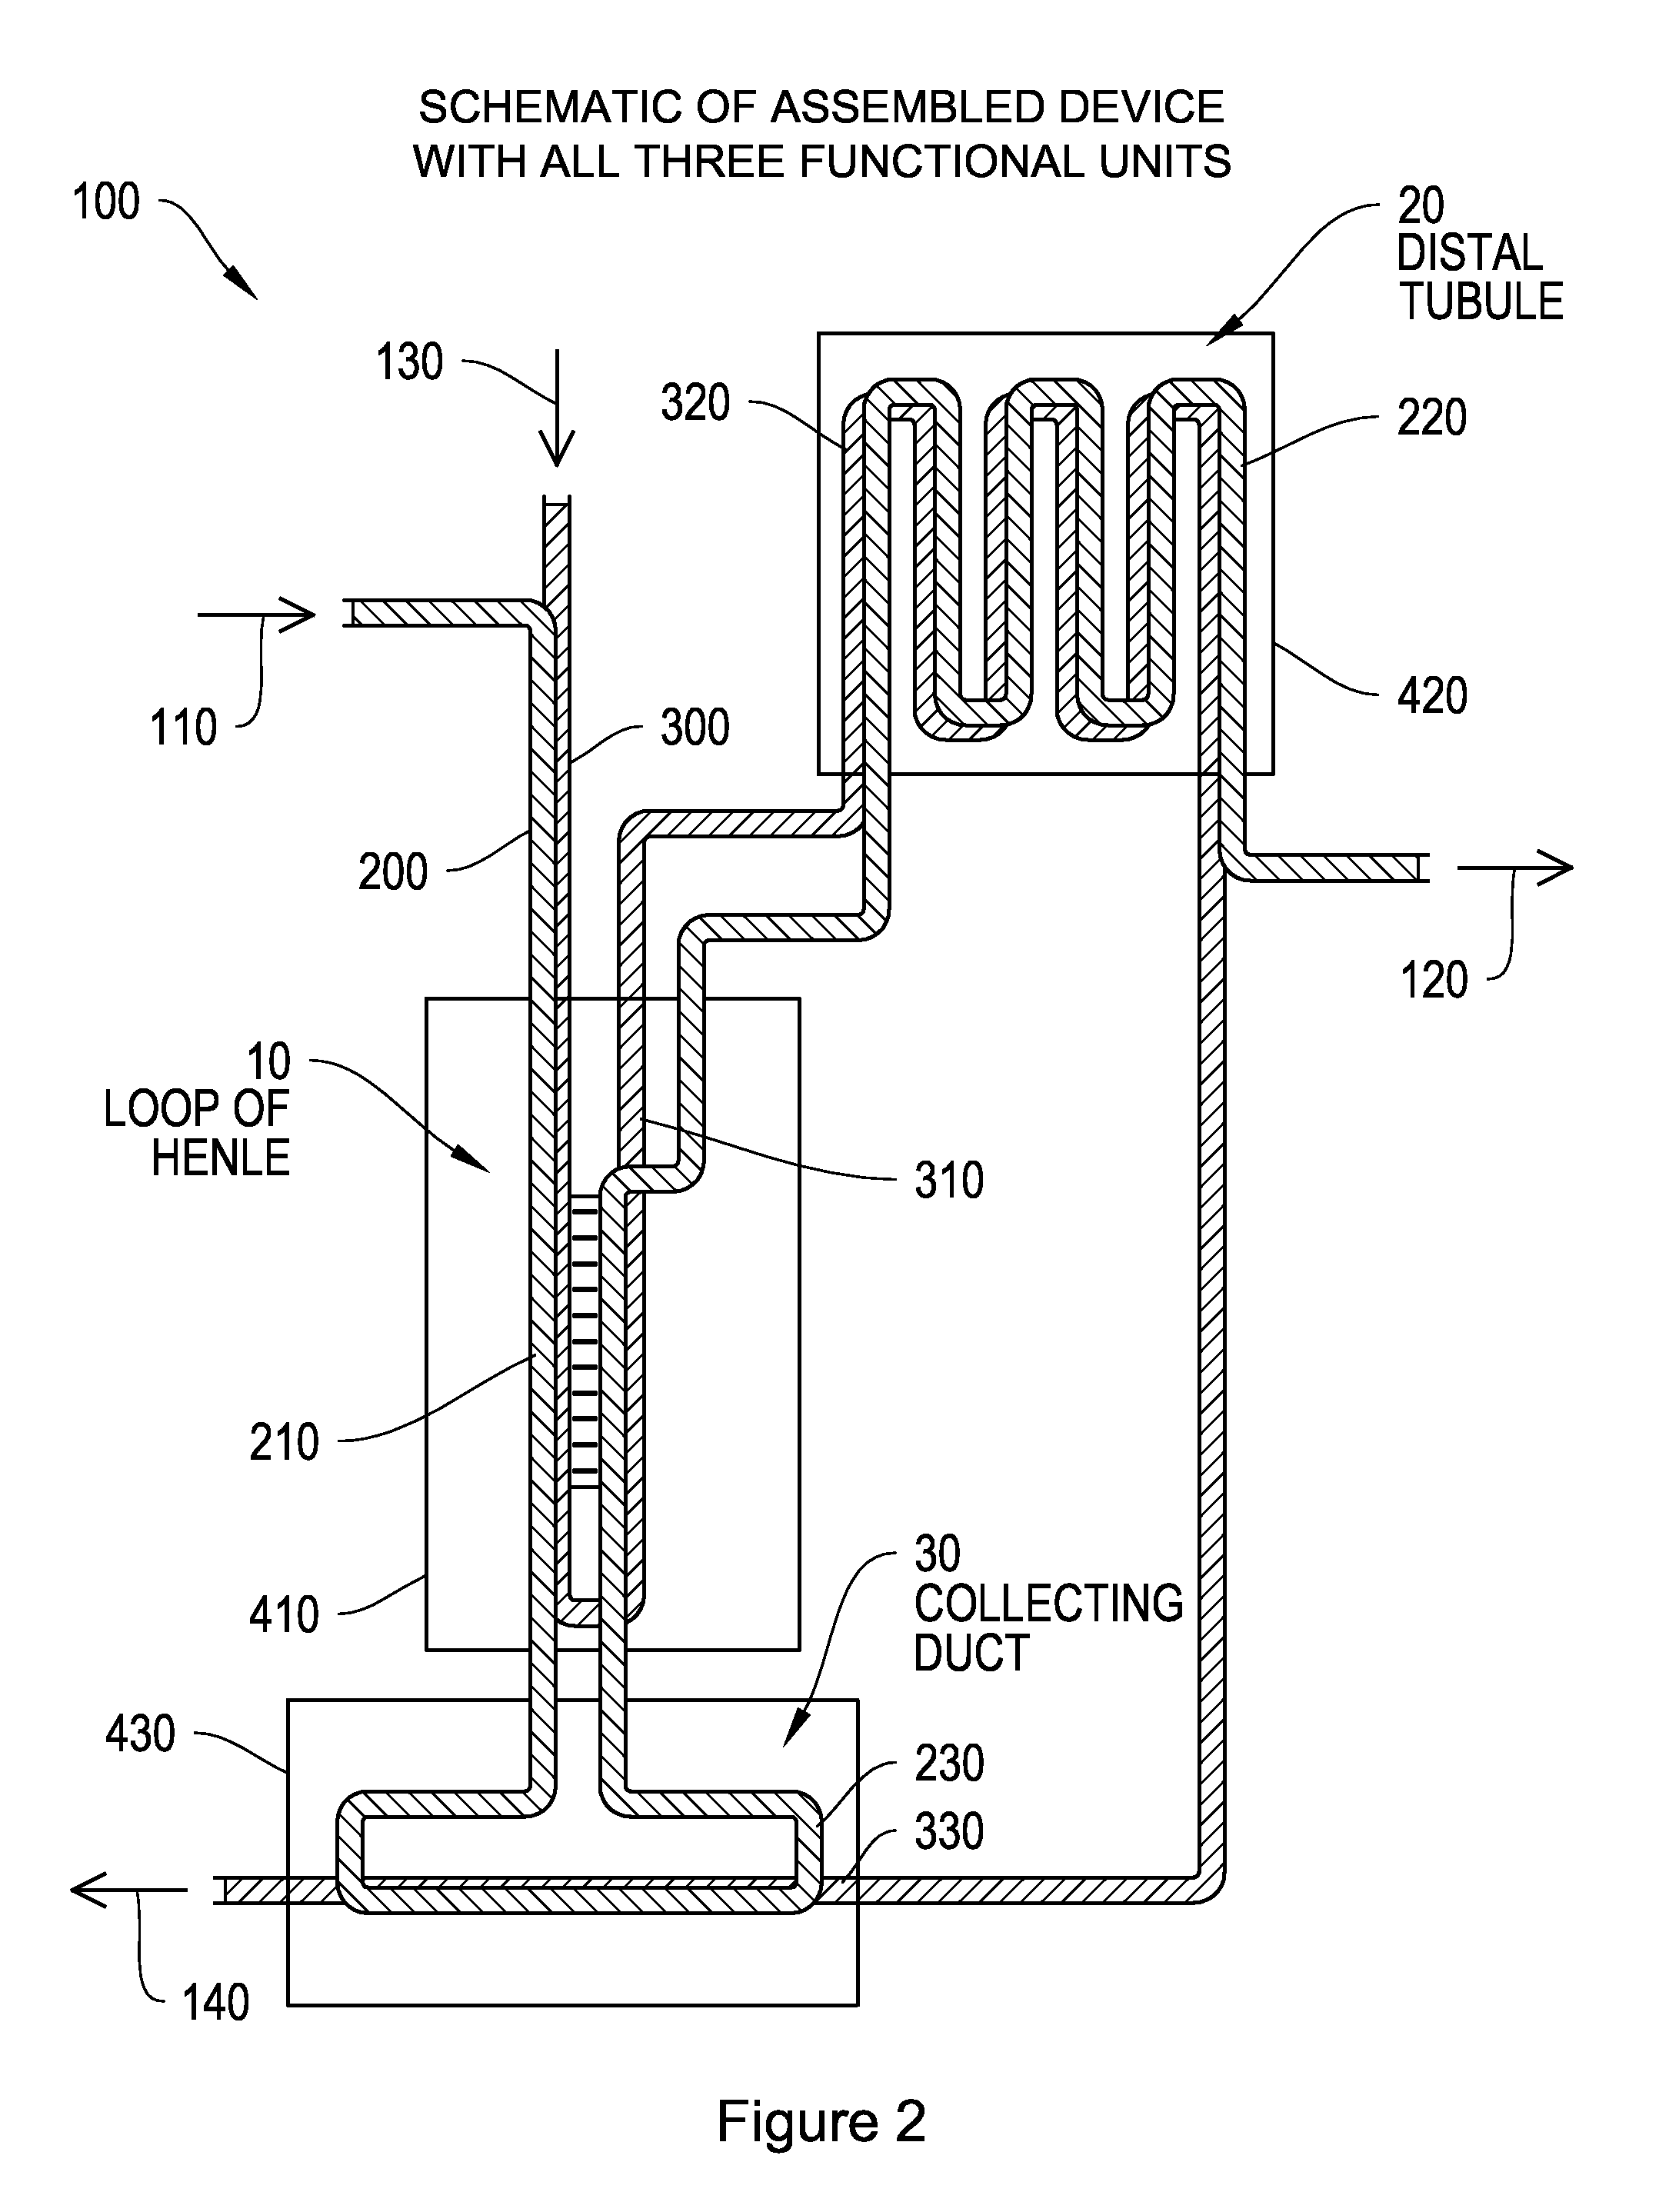 Systems, methods, and devices relating to a cellularized nephron unit